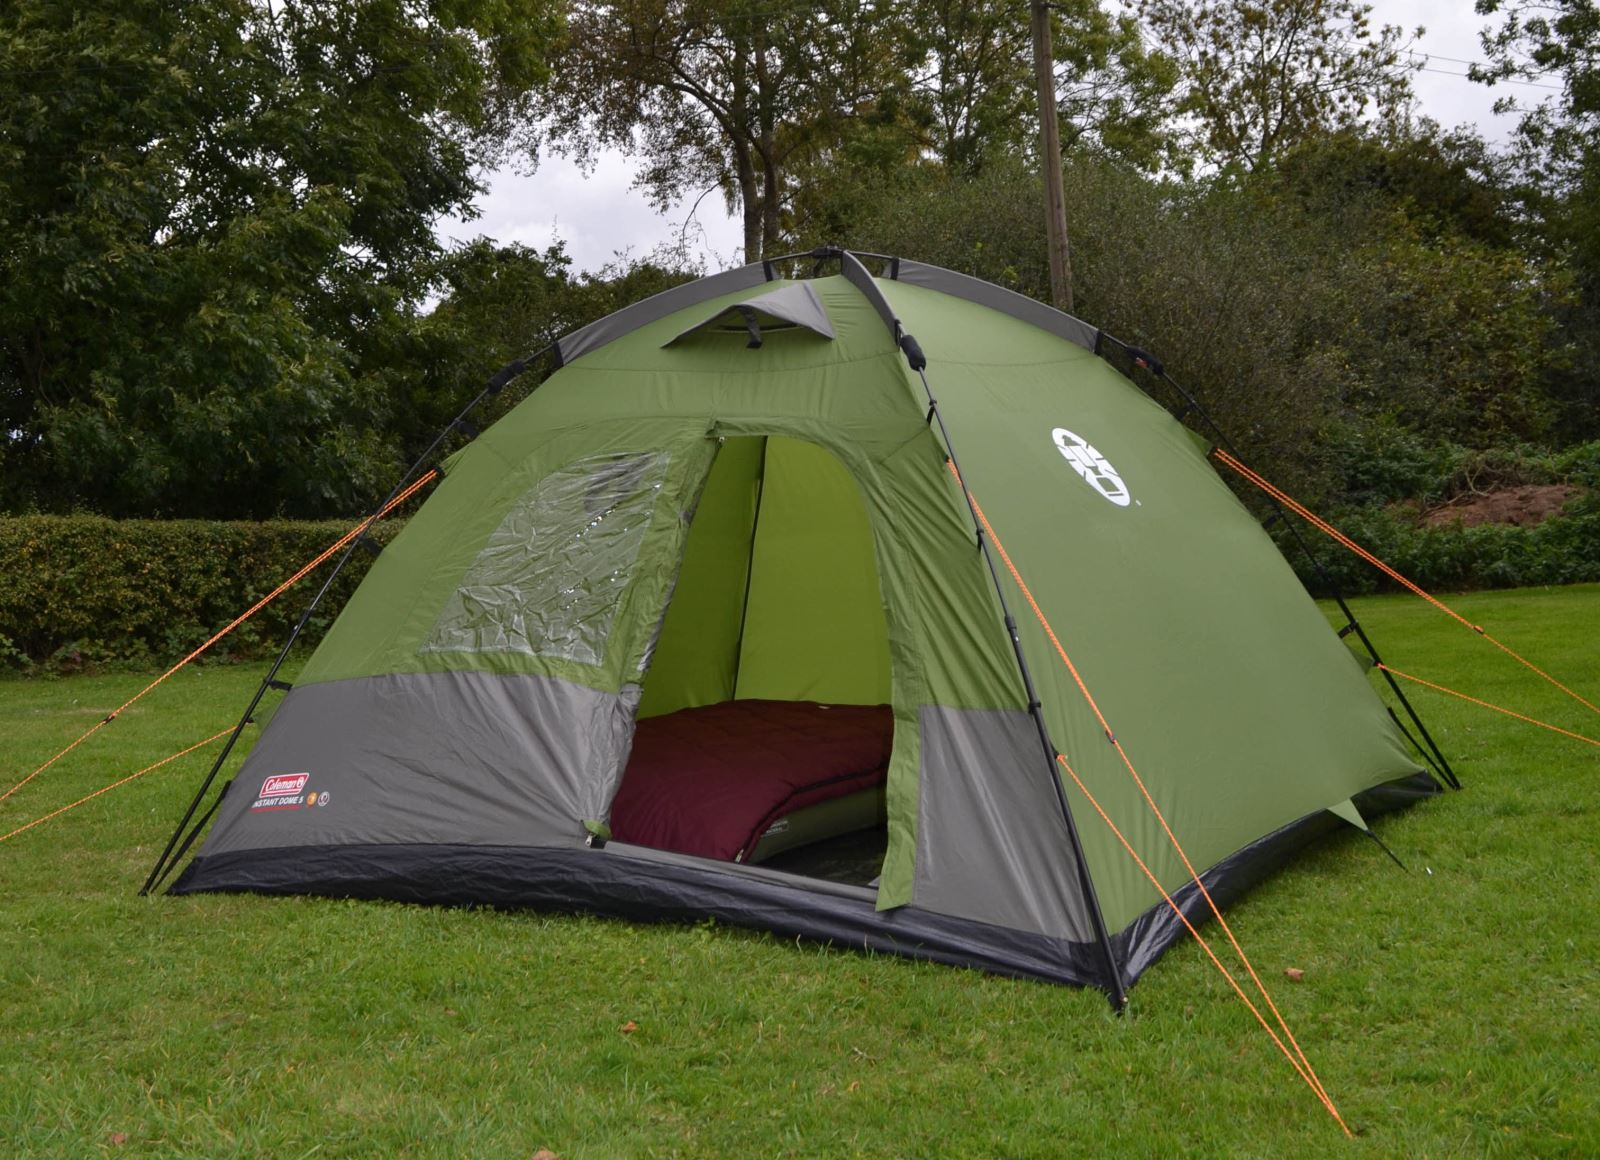 An example of a pop-up tent